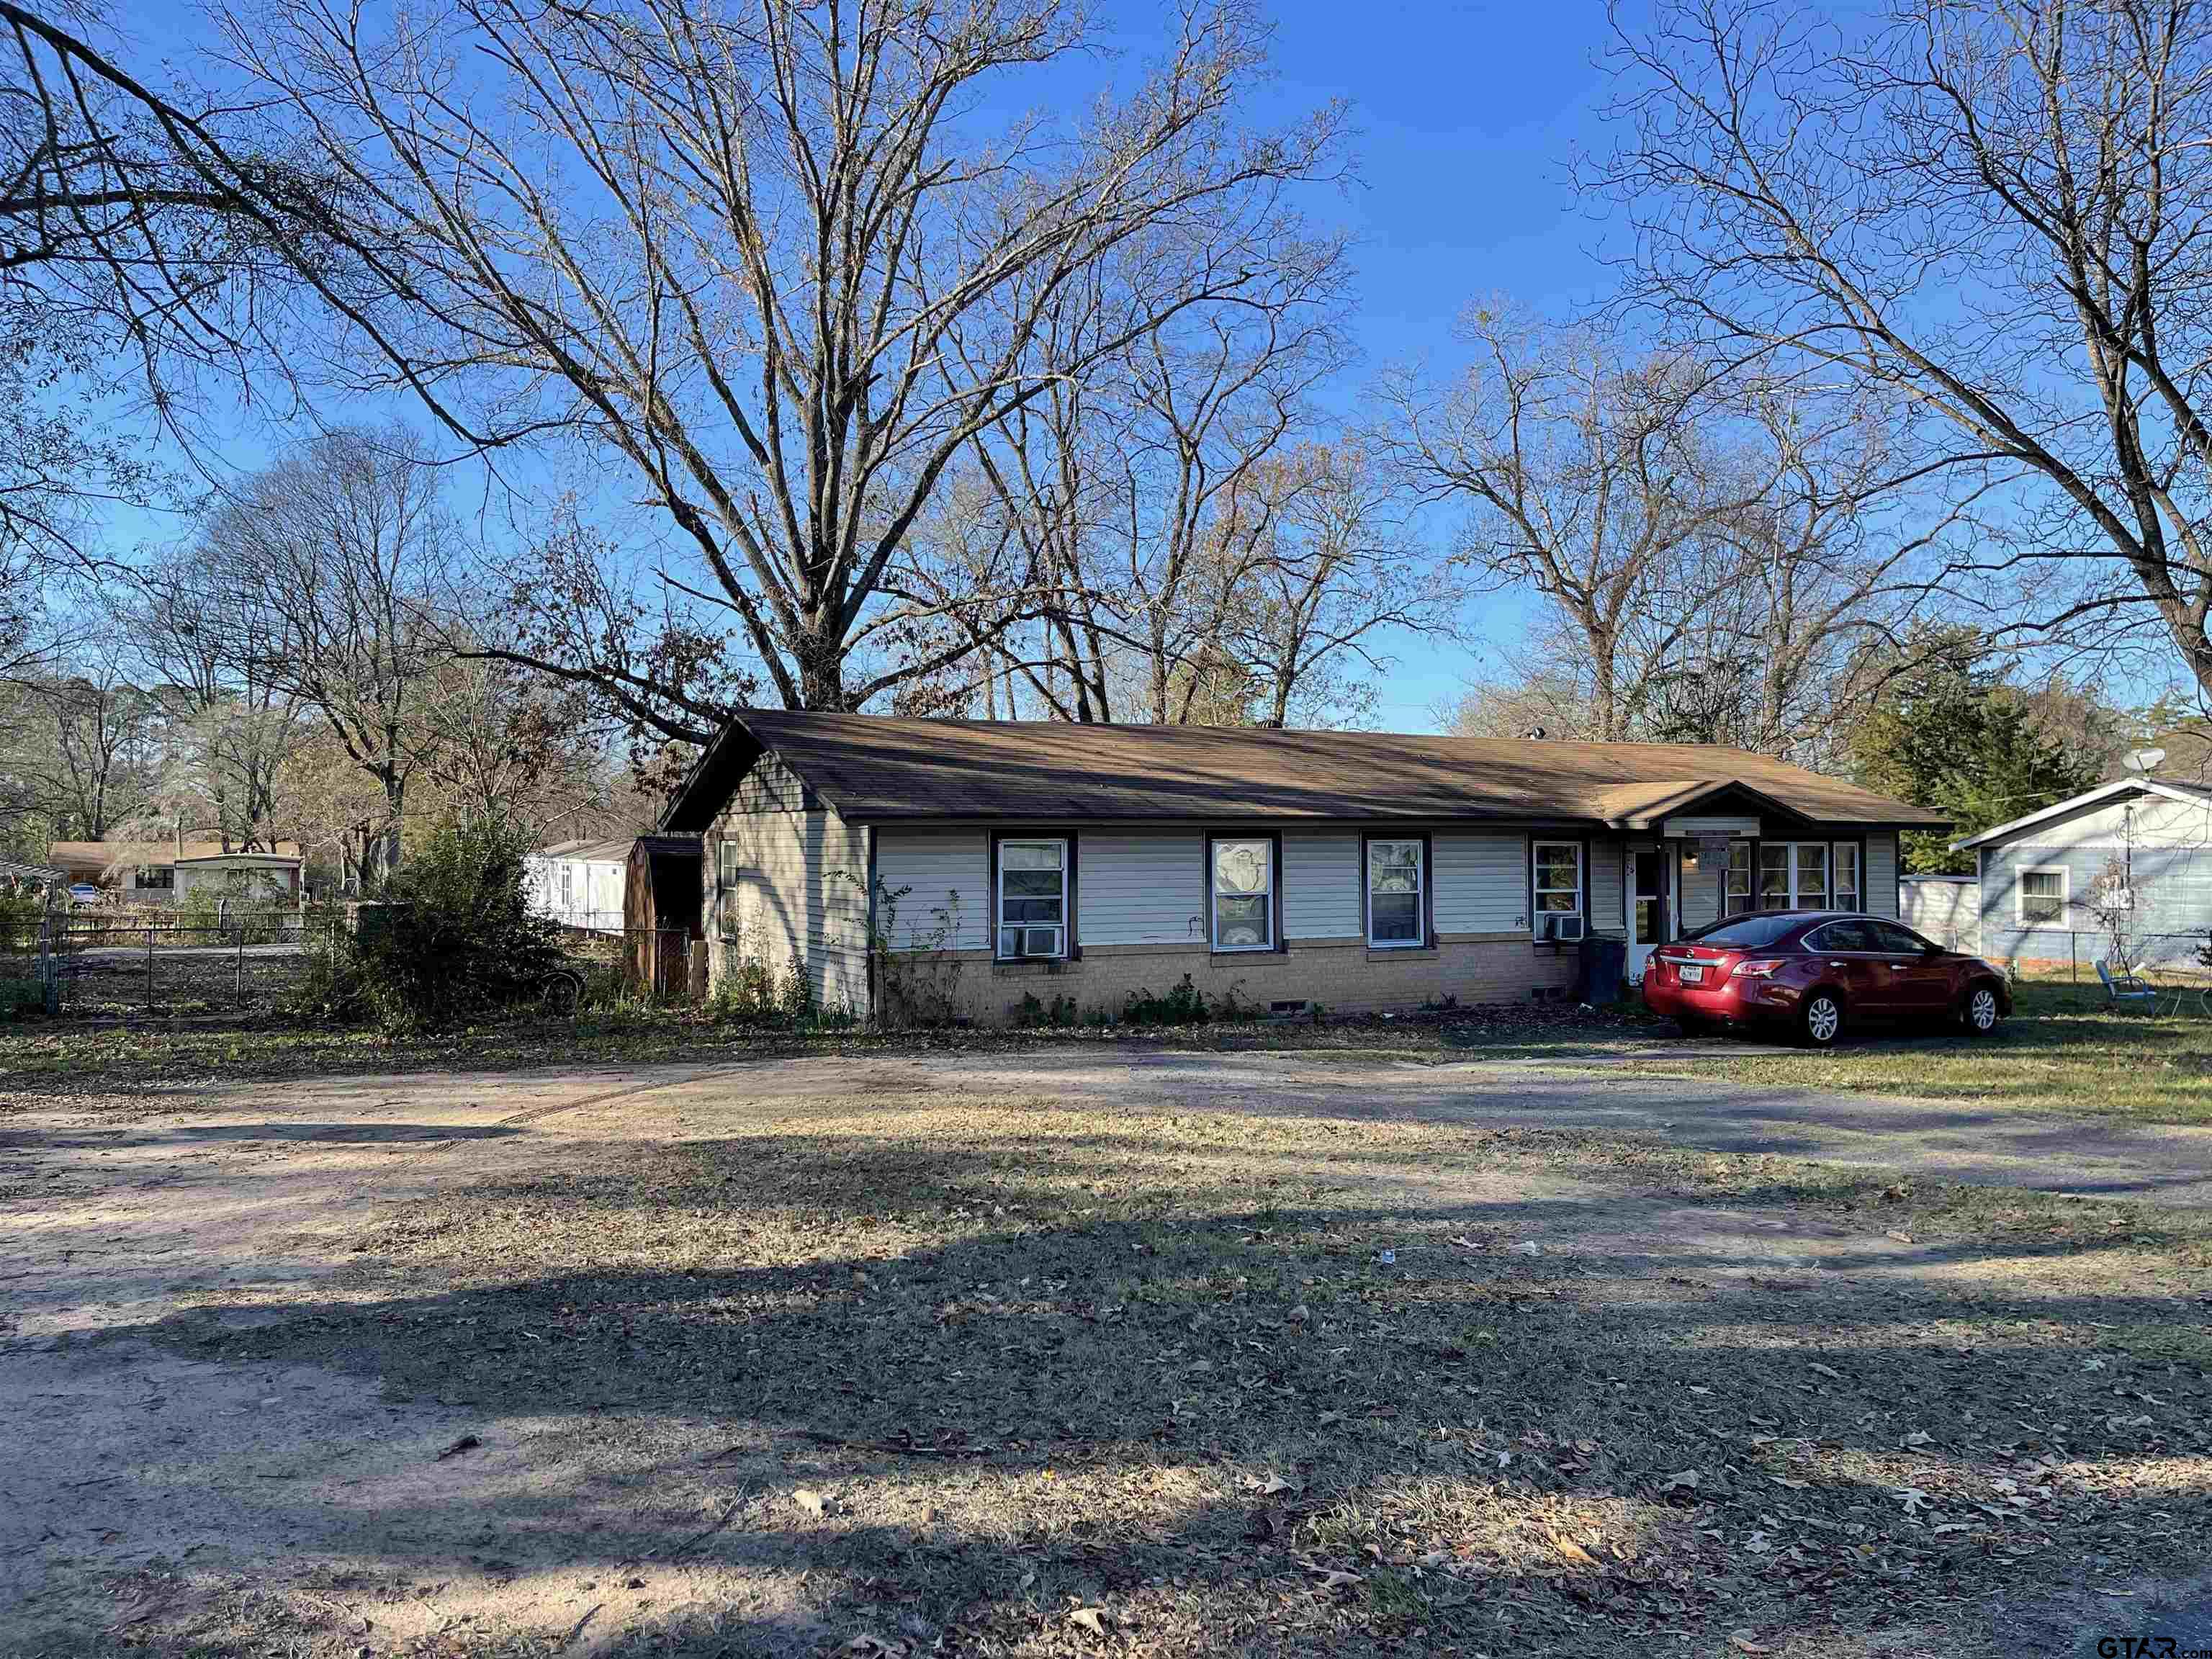 3 bedroom, 1 bath home ready to become your next flip, or income property, or both!